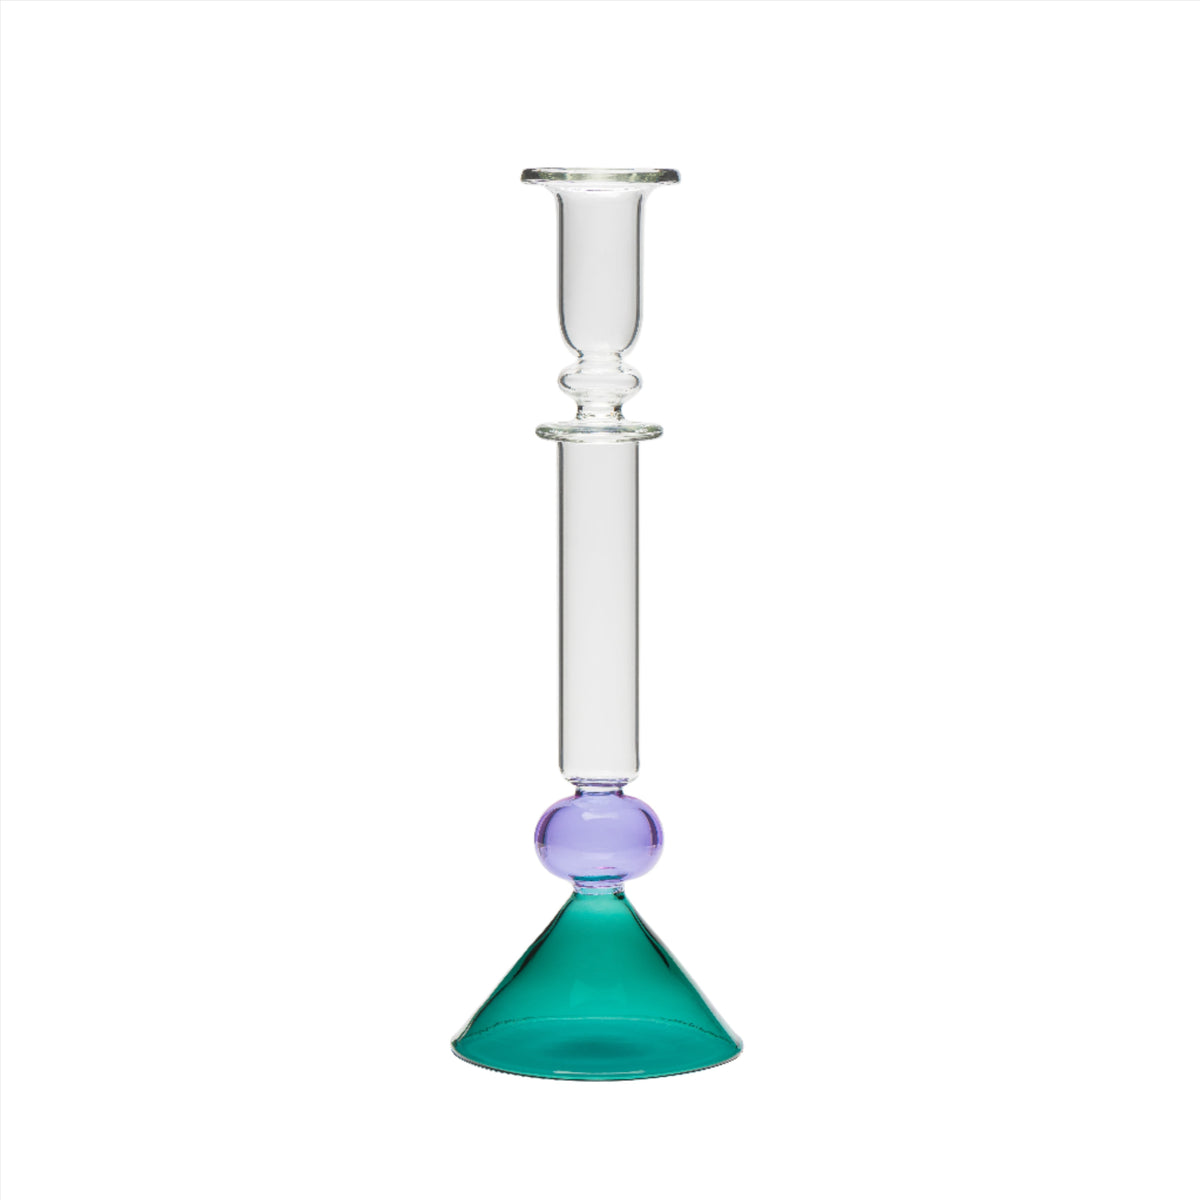 Martini Glass Candlestick in Teal